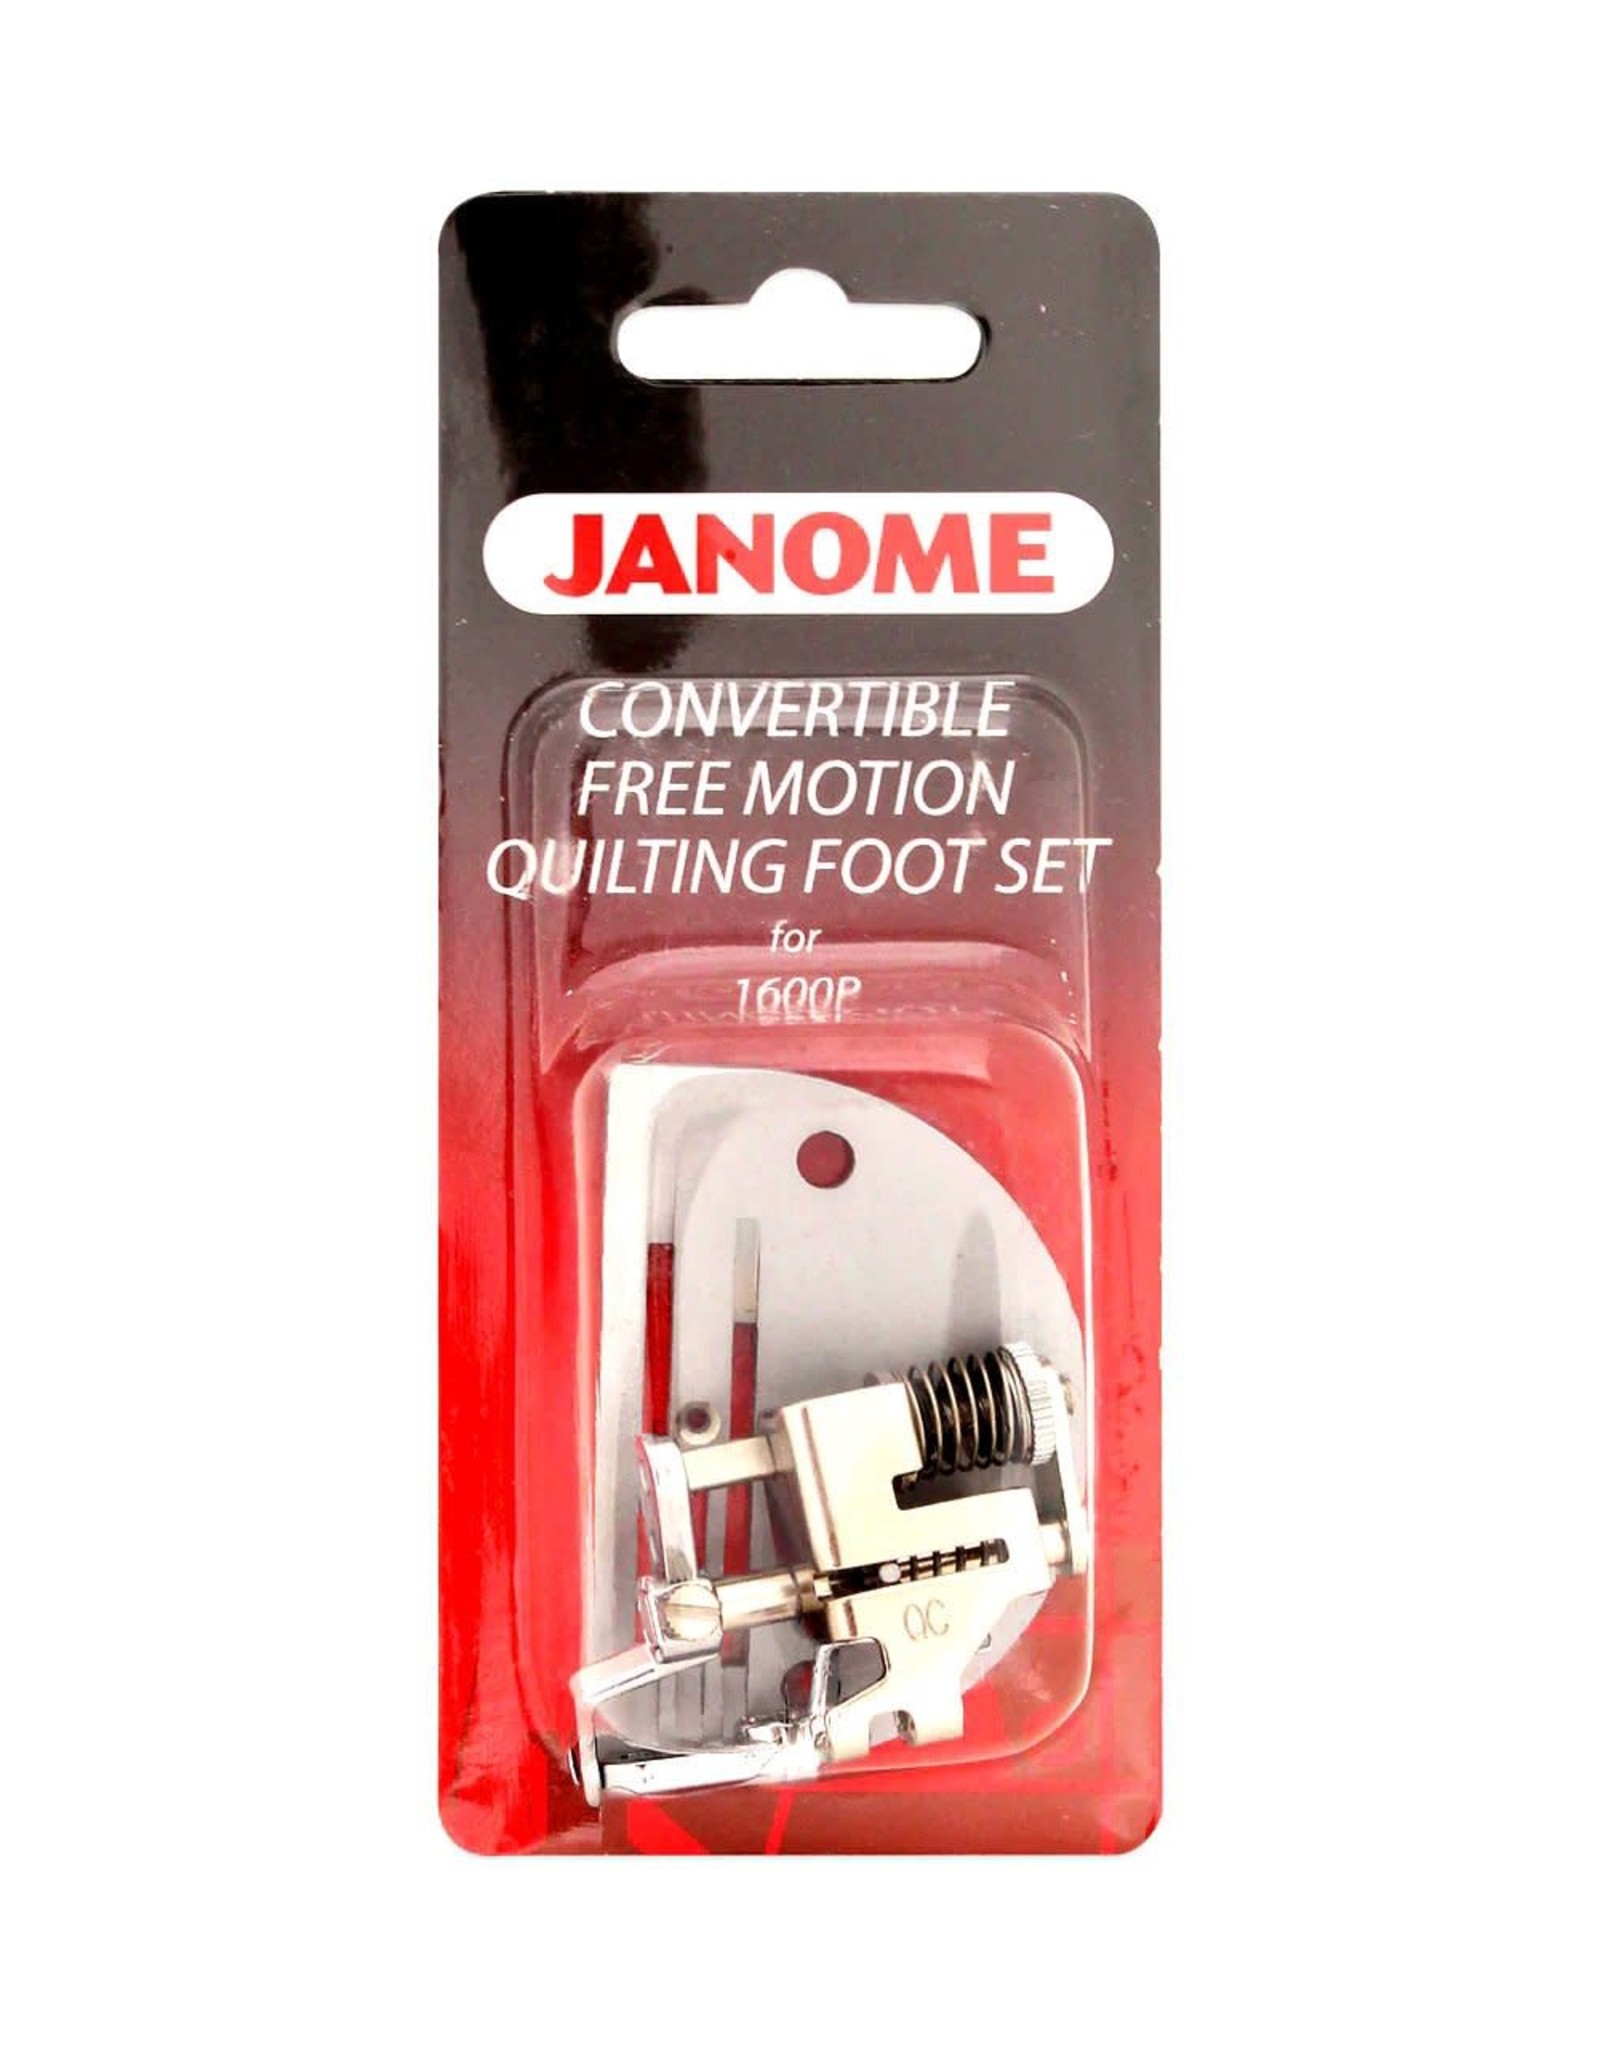 Convertible Free Motion Quilting Foot Set Janome #767433004 - 767433004